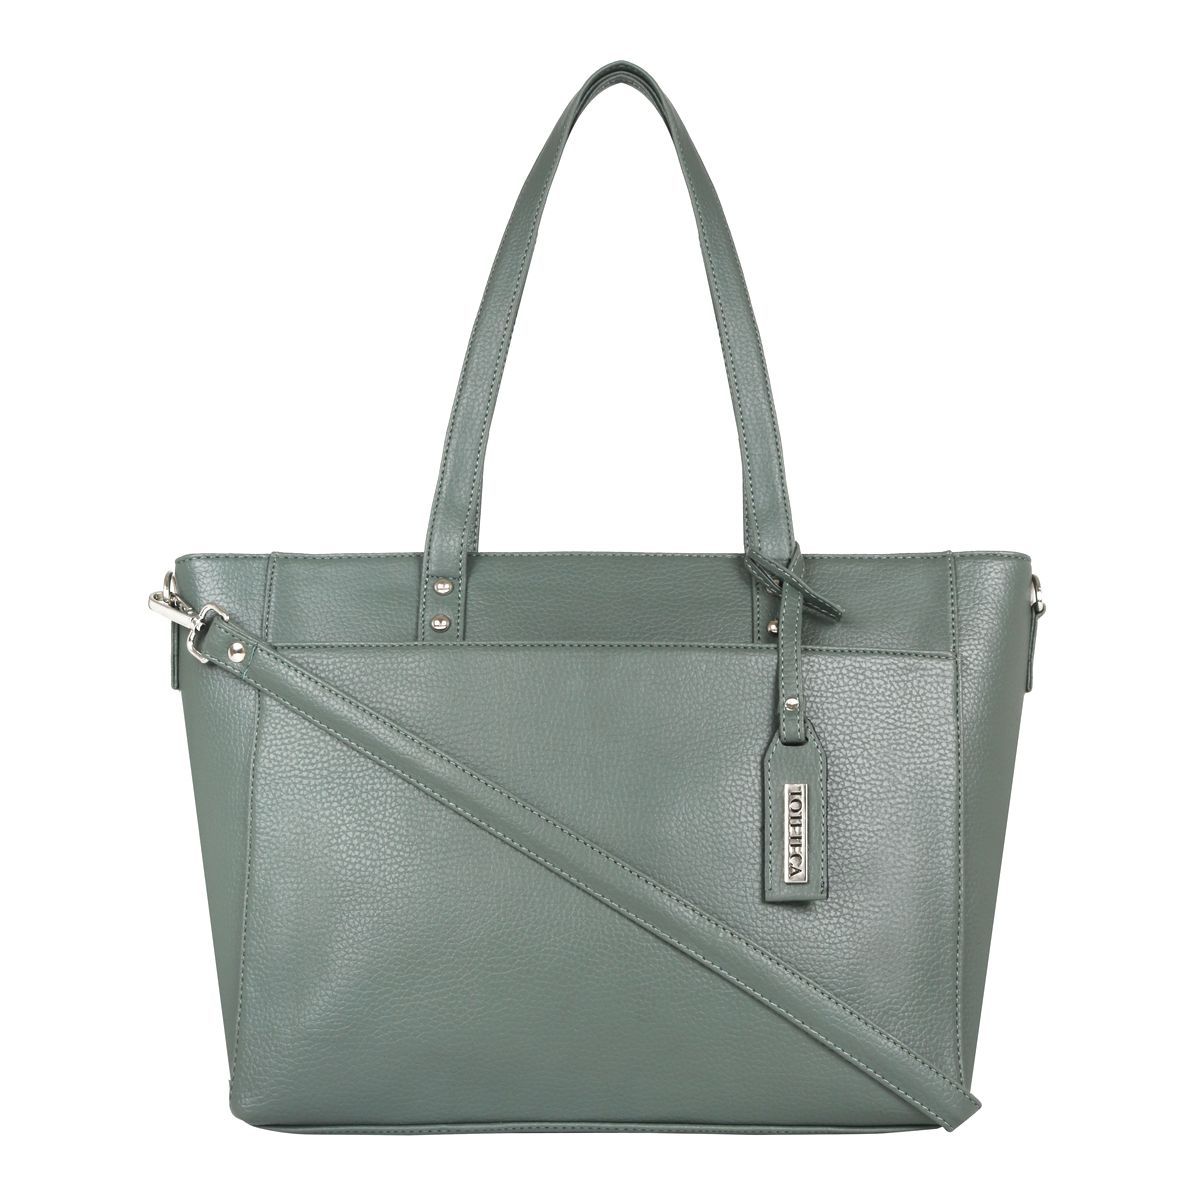 Toteteca Double Zip Tote Bag At Nykaa Fashion - Your Online Shopping Store